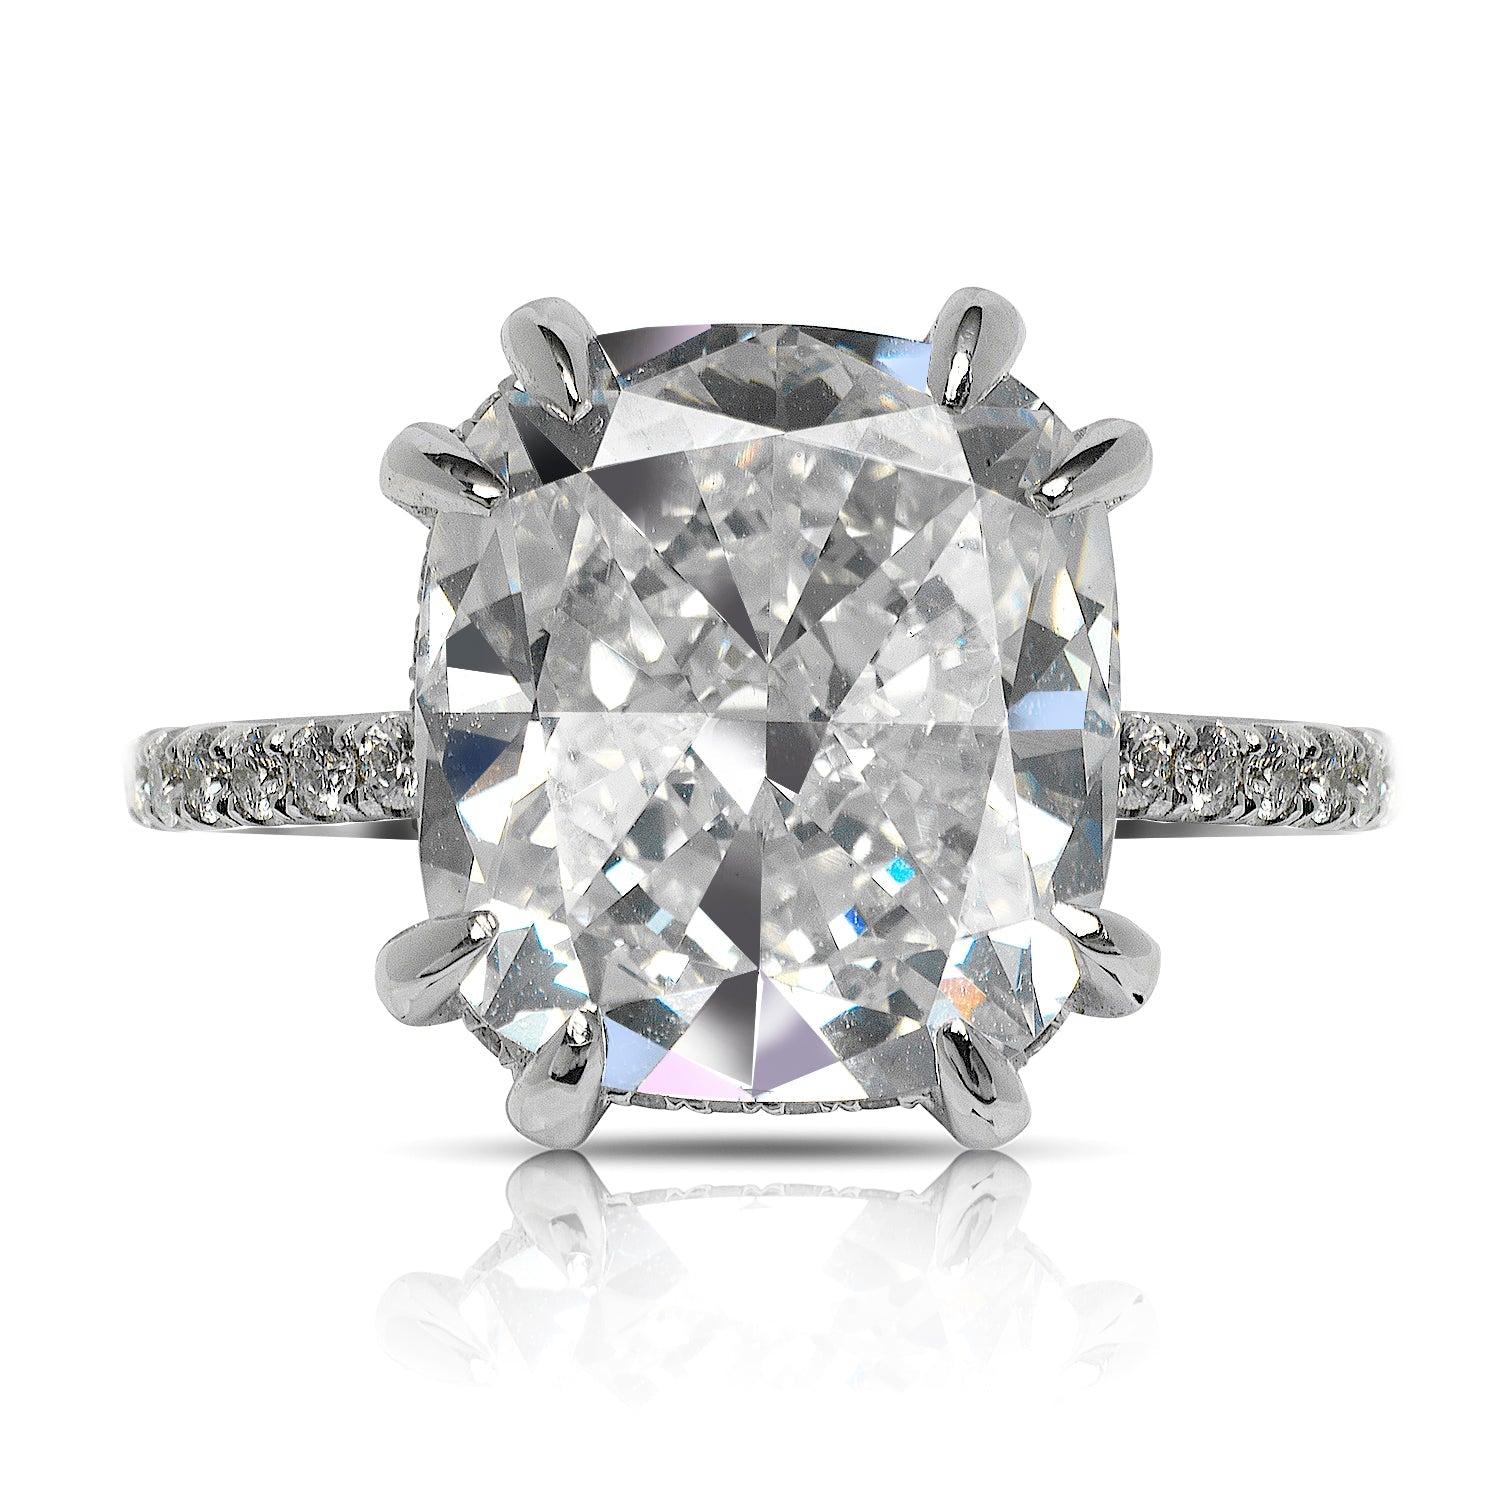 HAIFA  CUSHION CUT  SOLITAIRE DIAMOND ENGAGEMENT RING 18K WHITE GOLD  BY MIKE NEKTA

GIA CERTIFIED
Center Diamond
Carat Weight: 8.4 Carats
Color :  E*
Clarity: VS
Style:  CUSHION CUT 
Measurements:  

*This Diamond has been treated by one or more